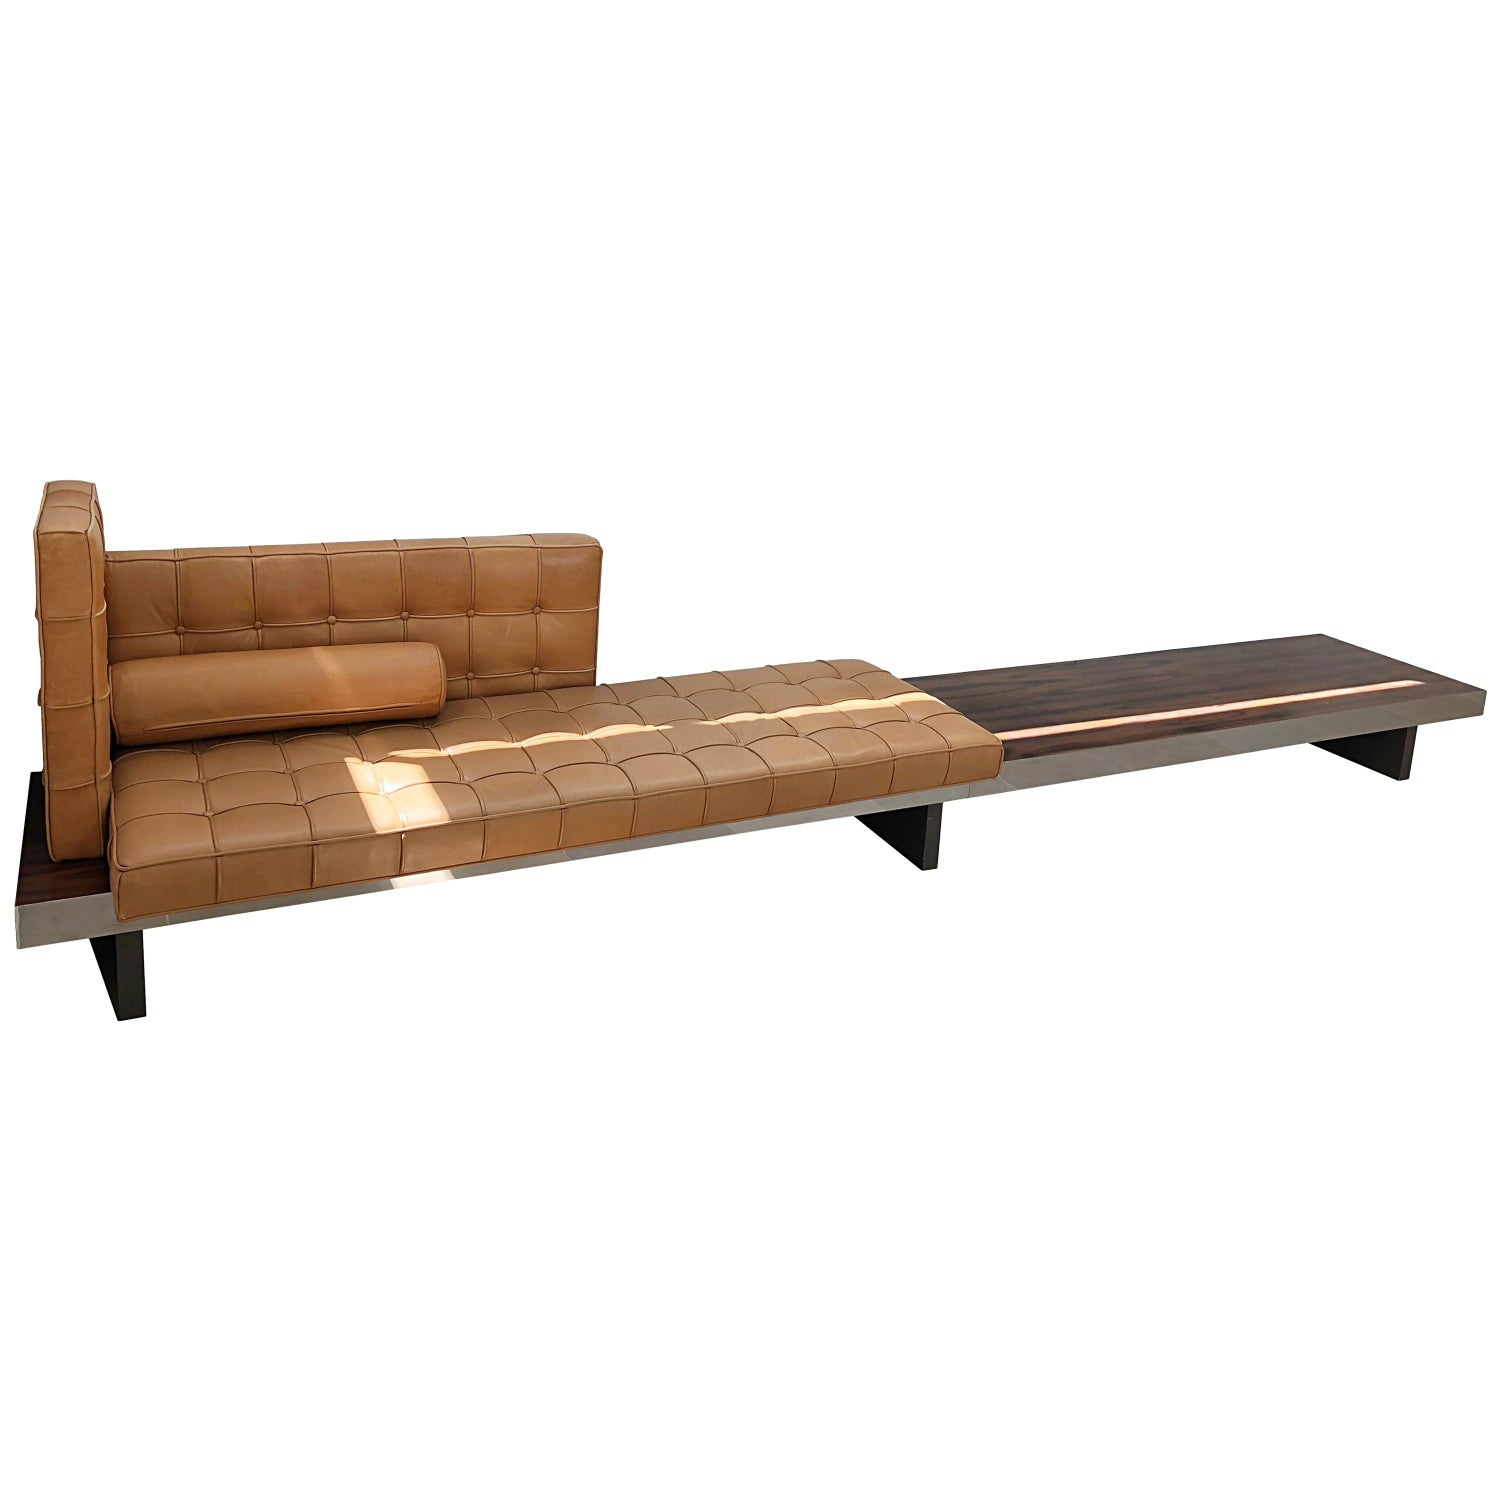 Hotel Bench - 3 For Sale on 1stDibs